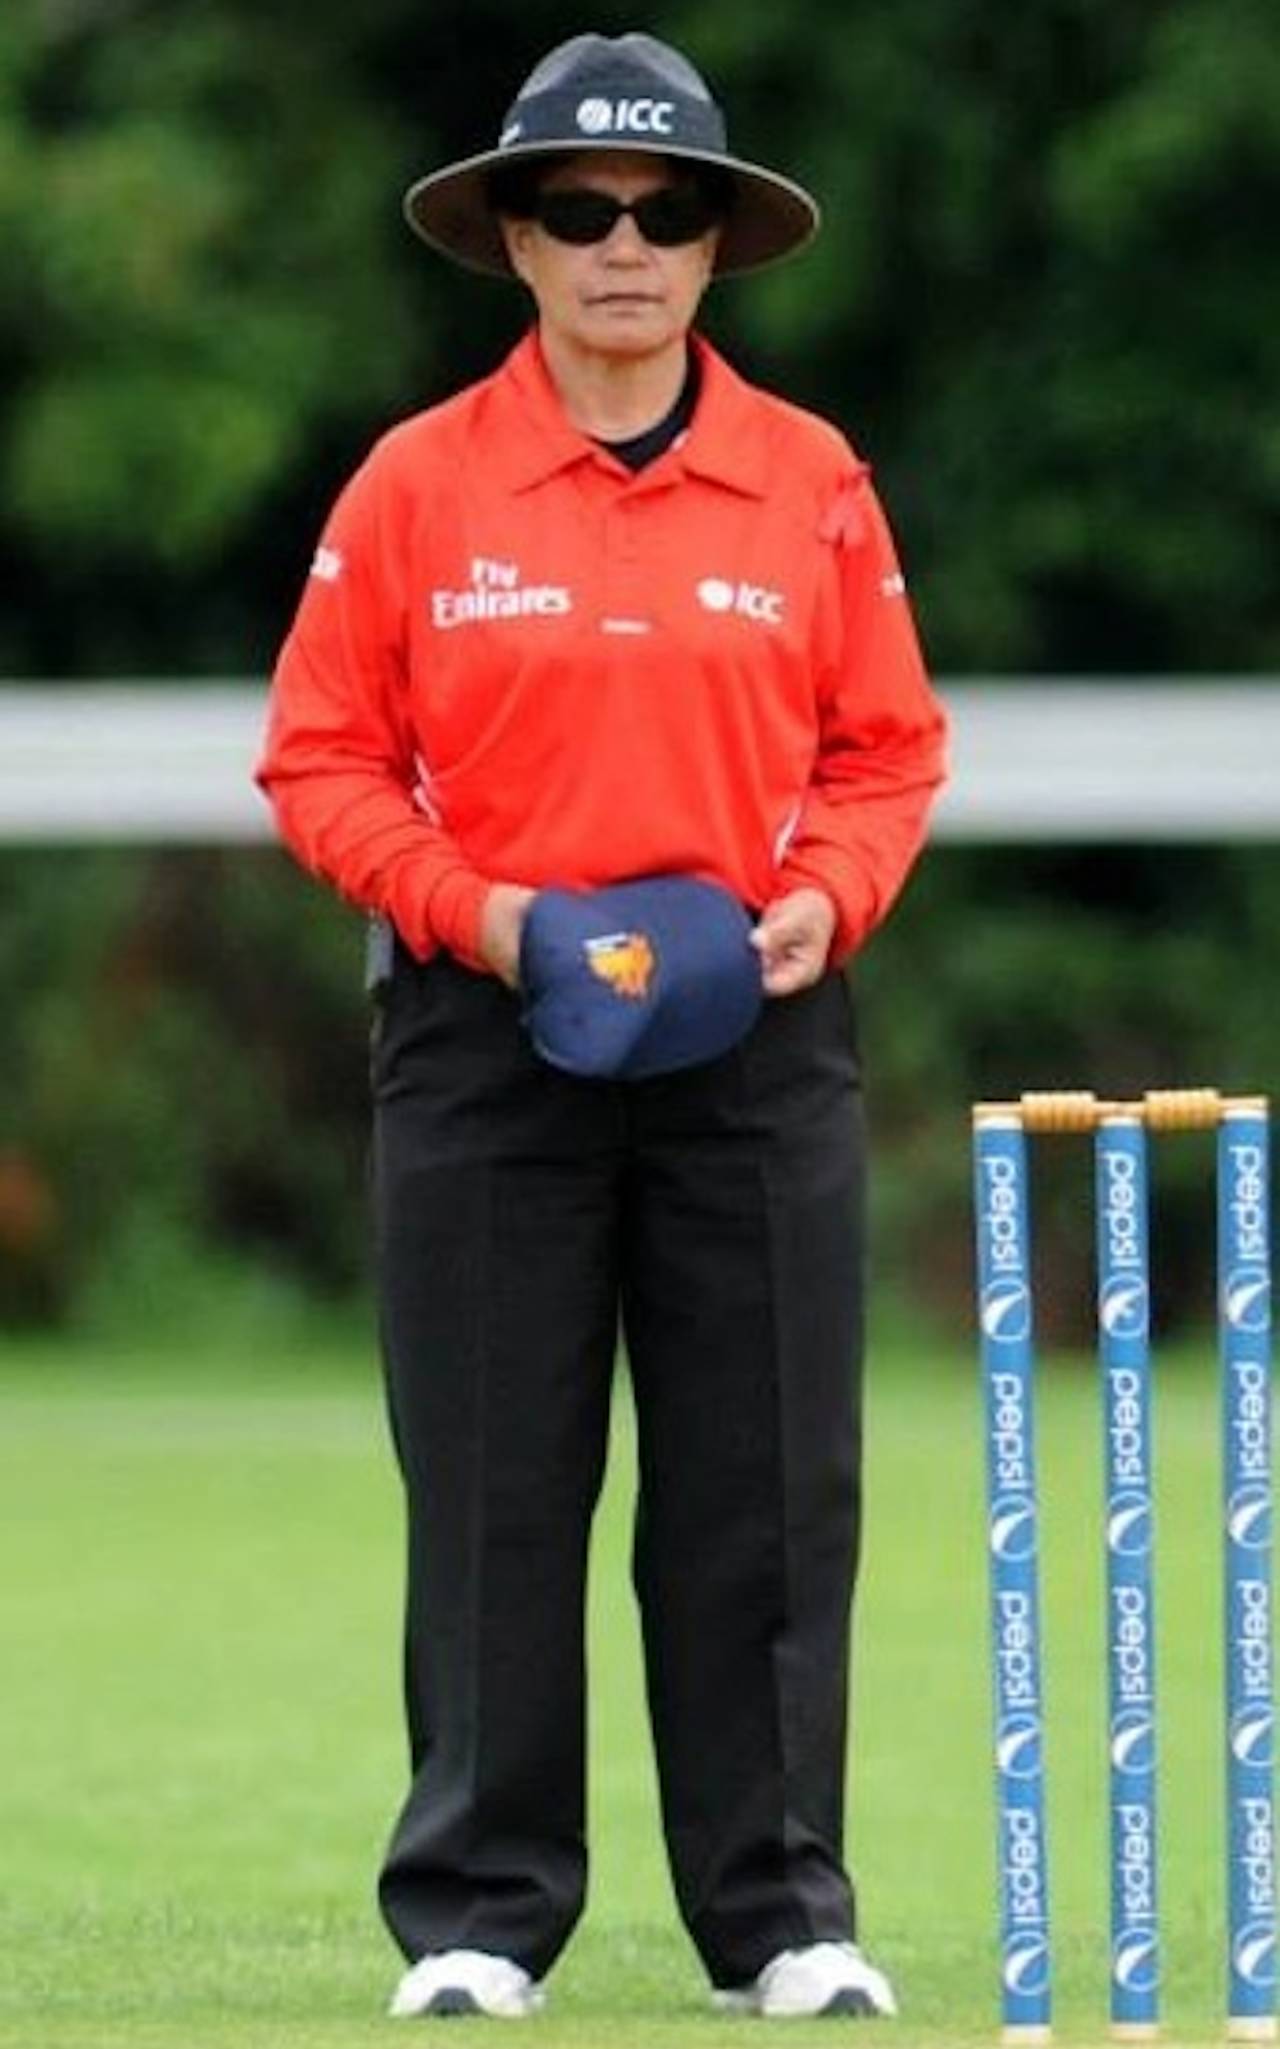 Last year, Kathy Cross became the first woman to be named in an ICC umpires' panel&nbsp;&nbsp;&bull;&nbsp;&nbsp;Ian Jacob